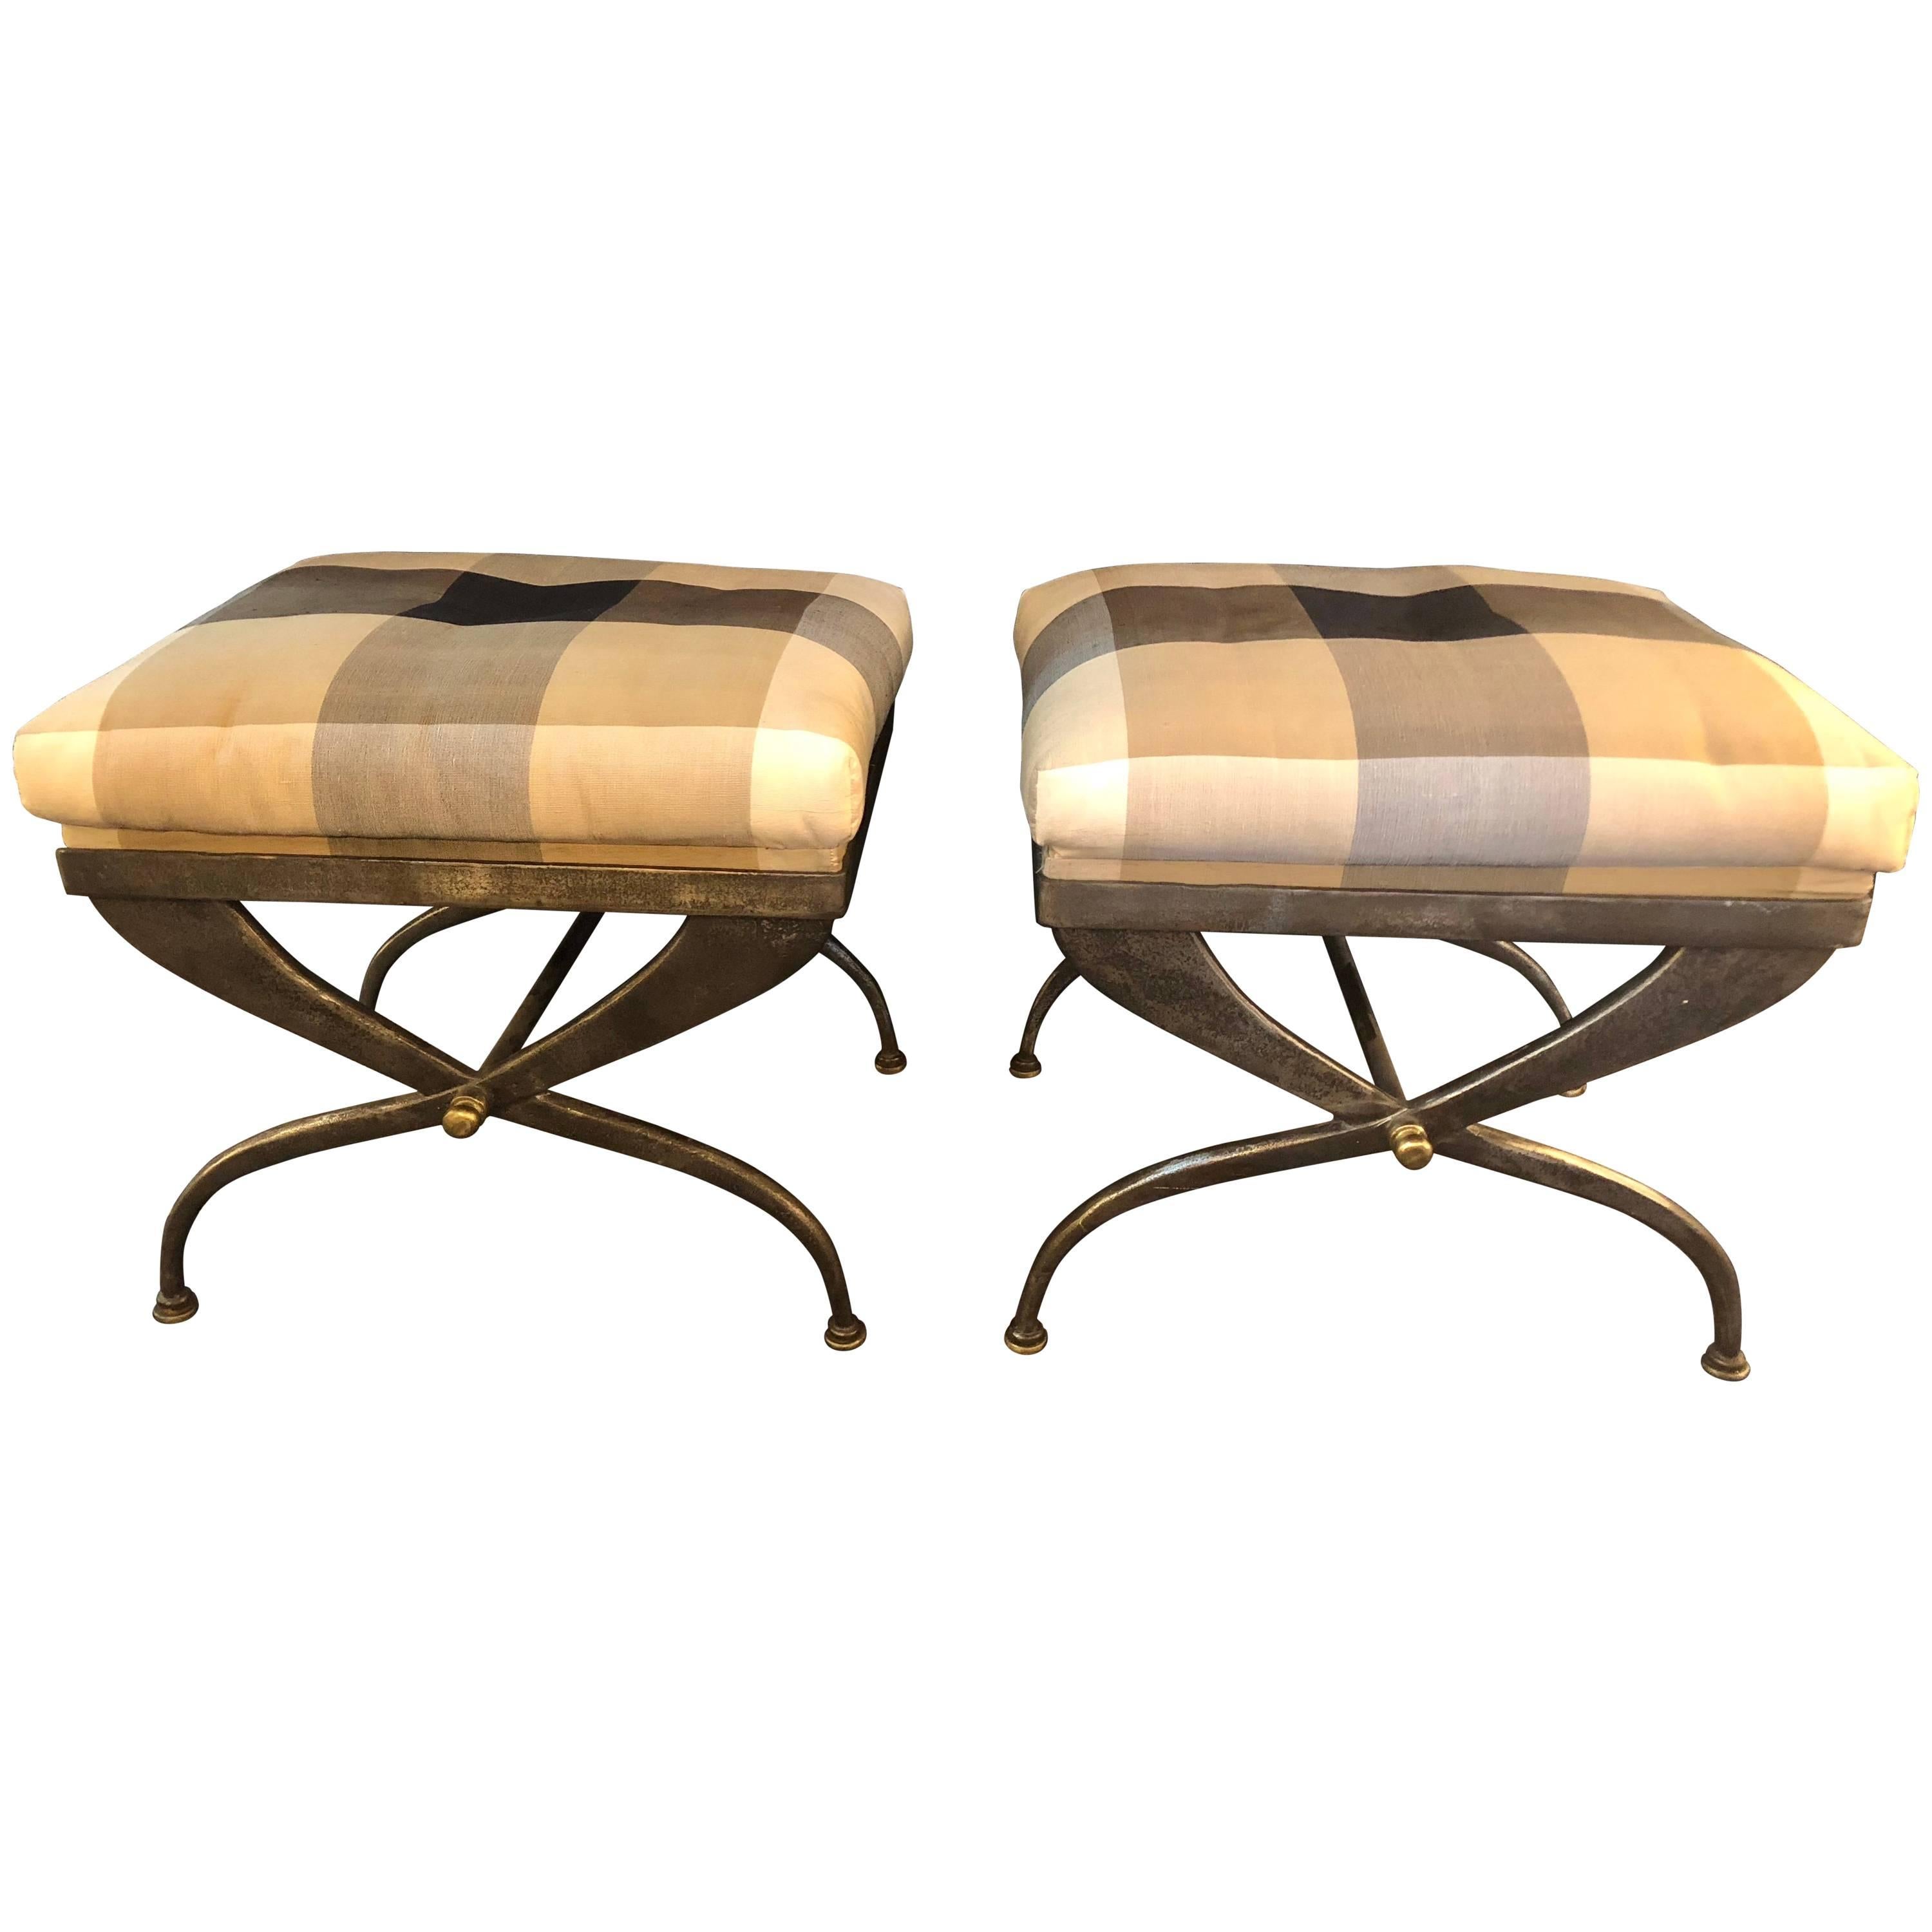 Pair of Maison Jansen Footstools or Benches X-Design Steel and Bronze-Mounted